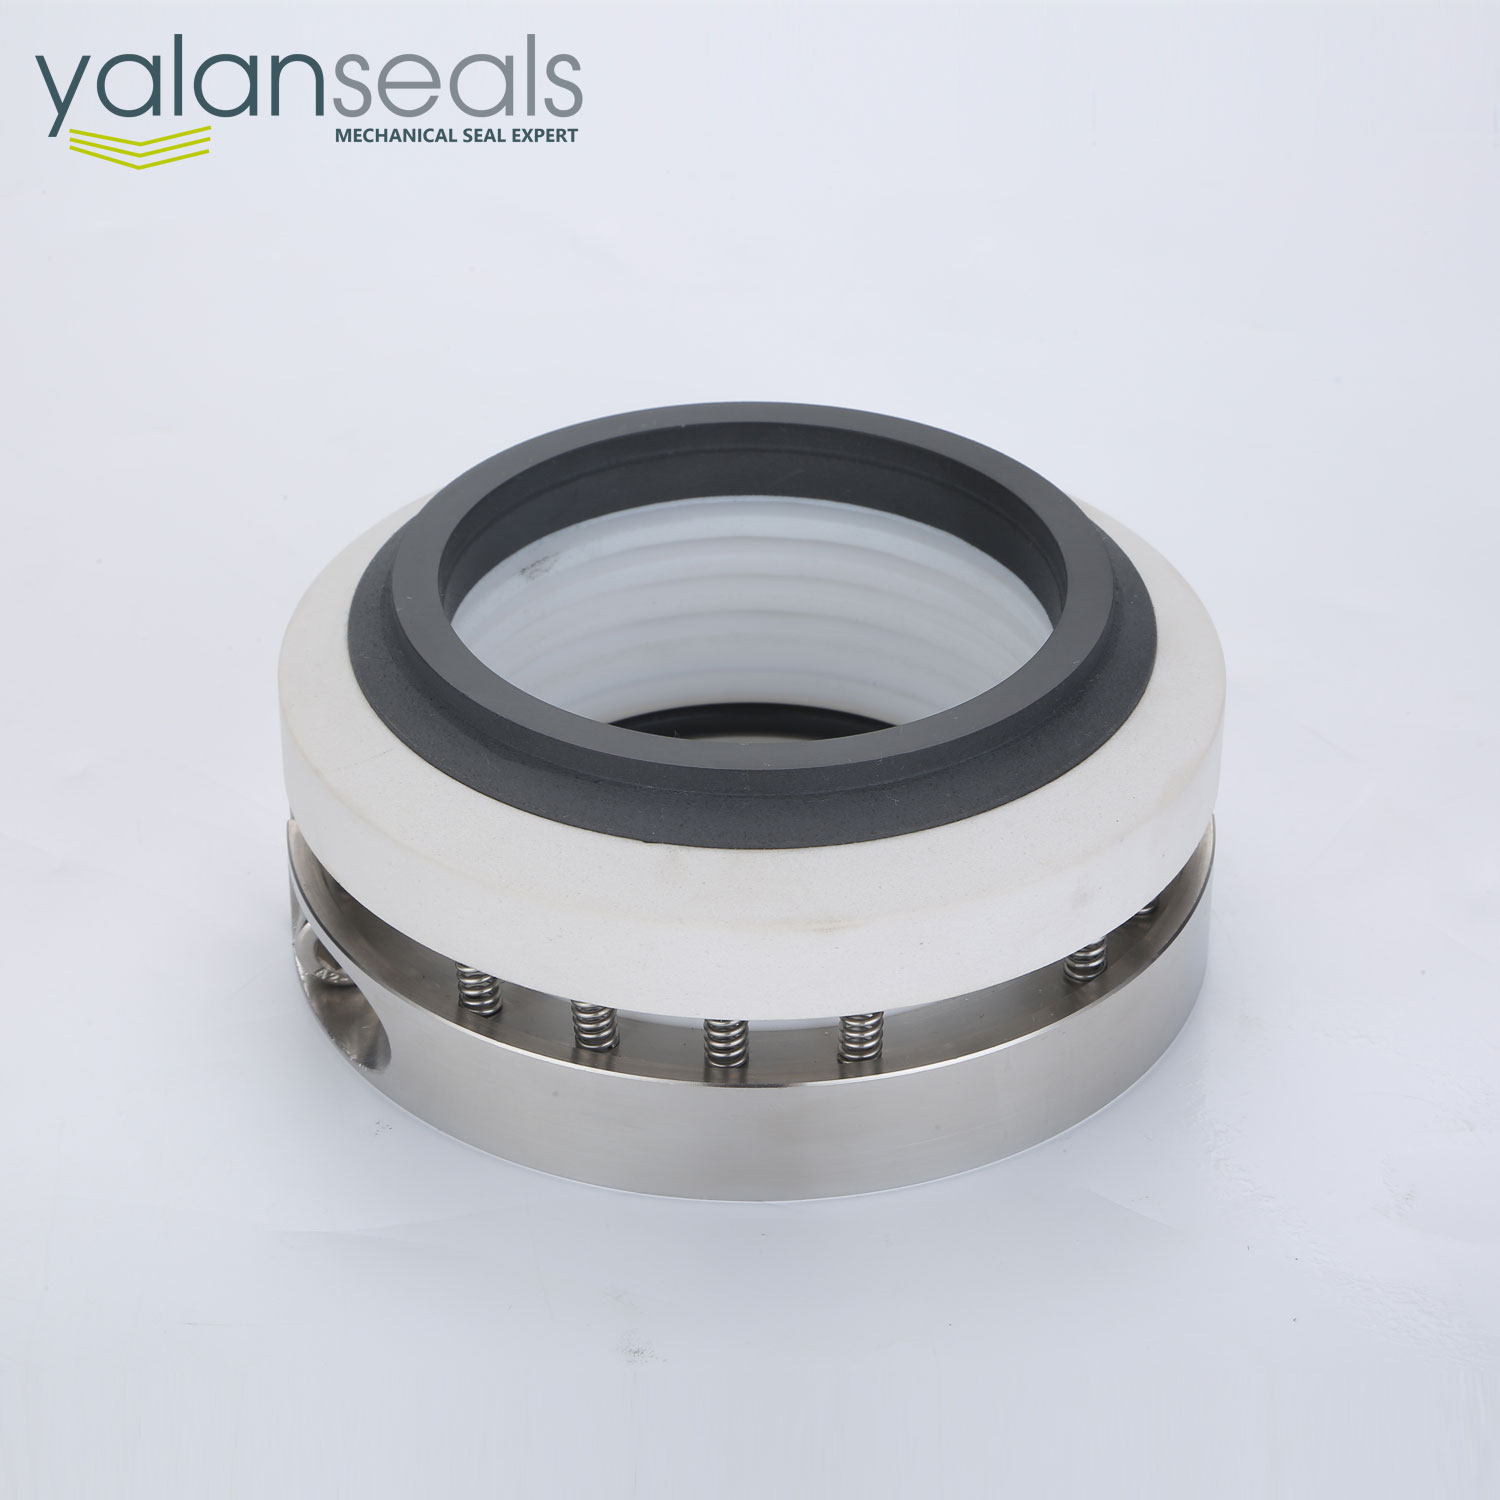 Type 212 Mechanical Seal Rotary for Mixers